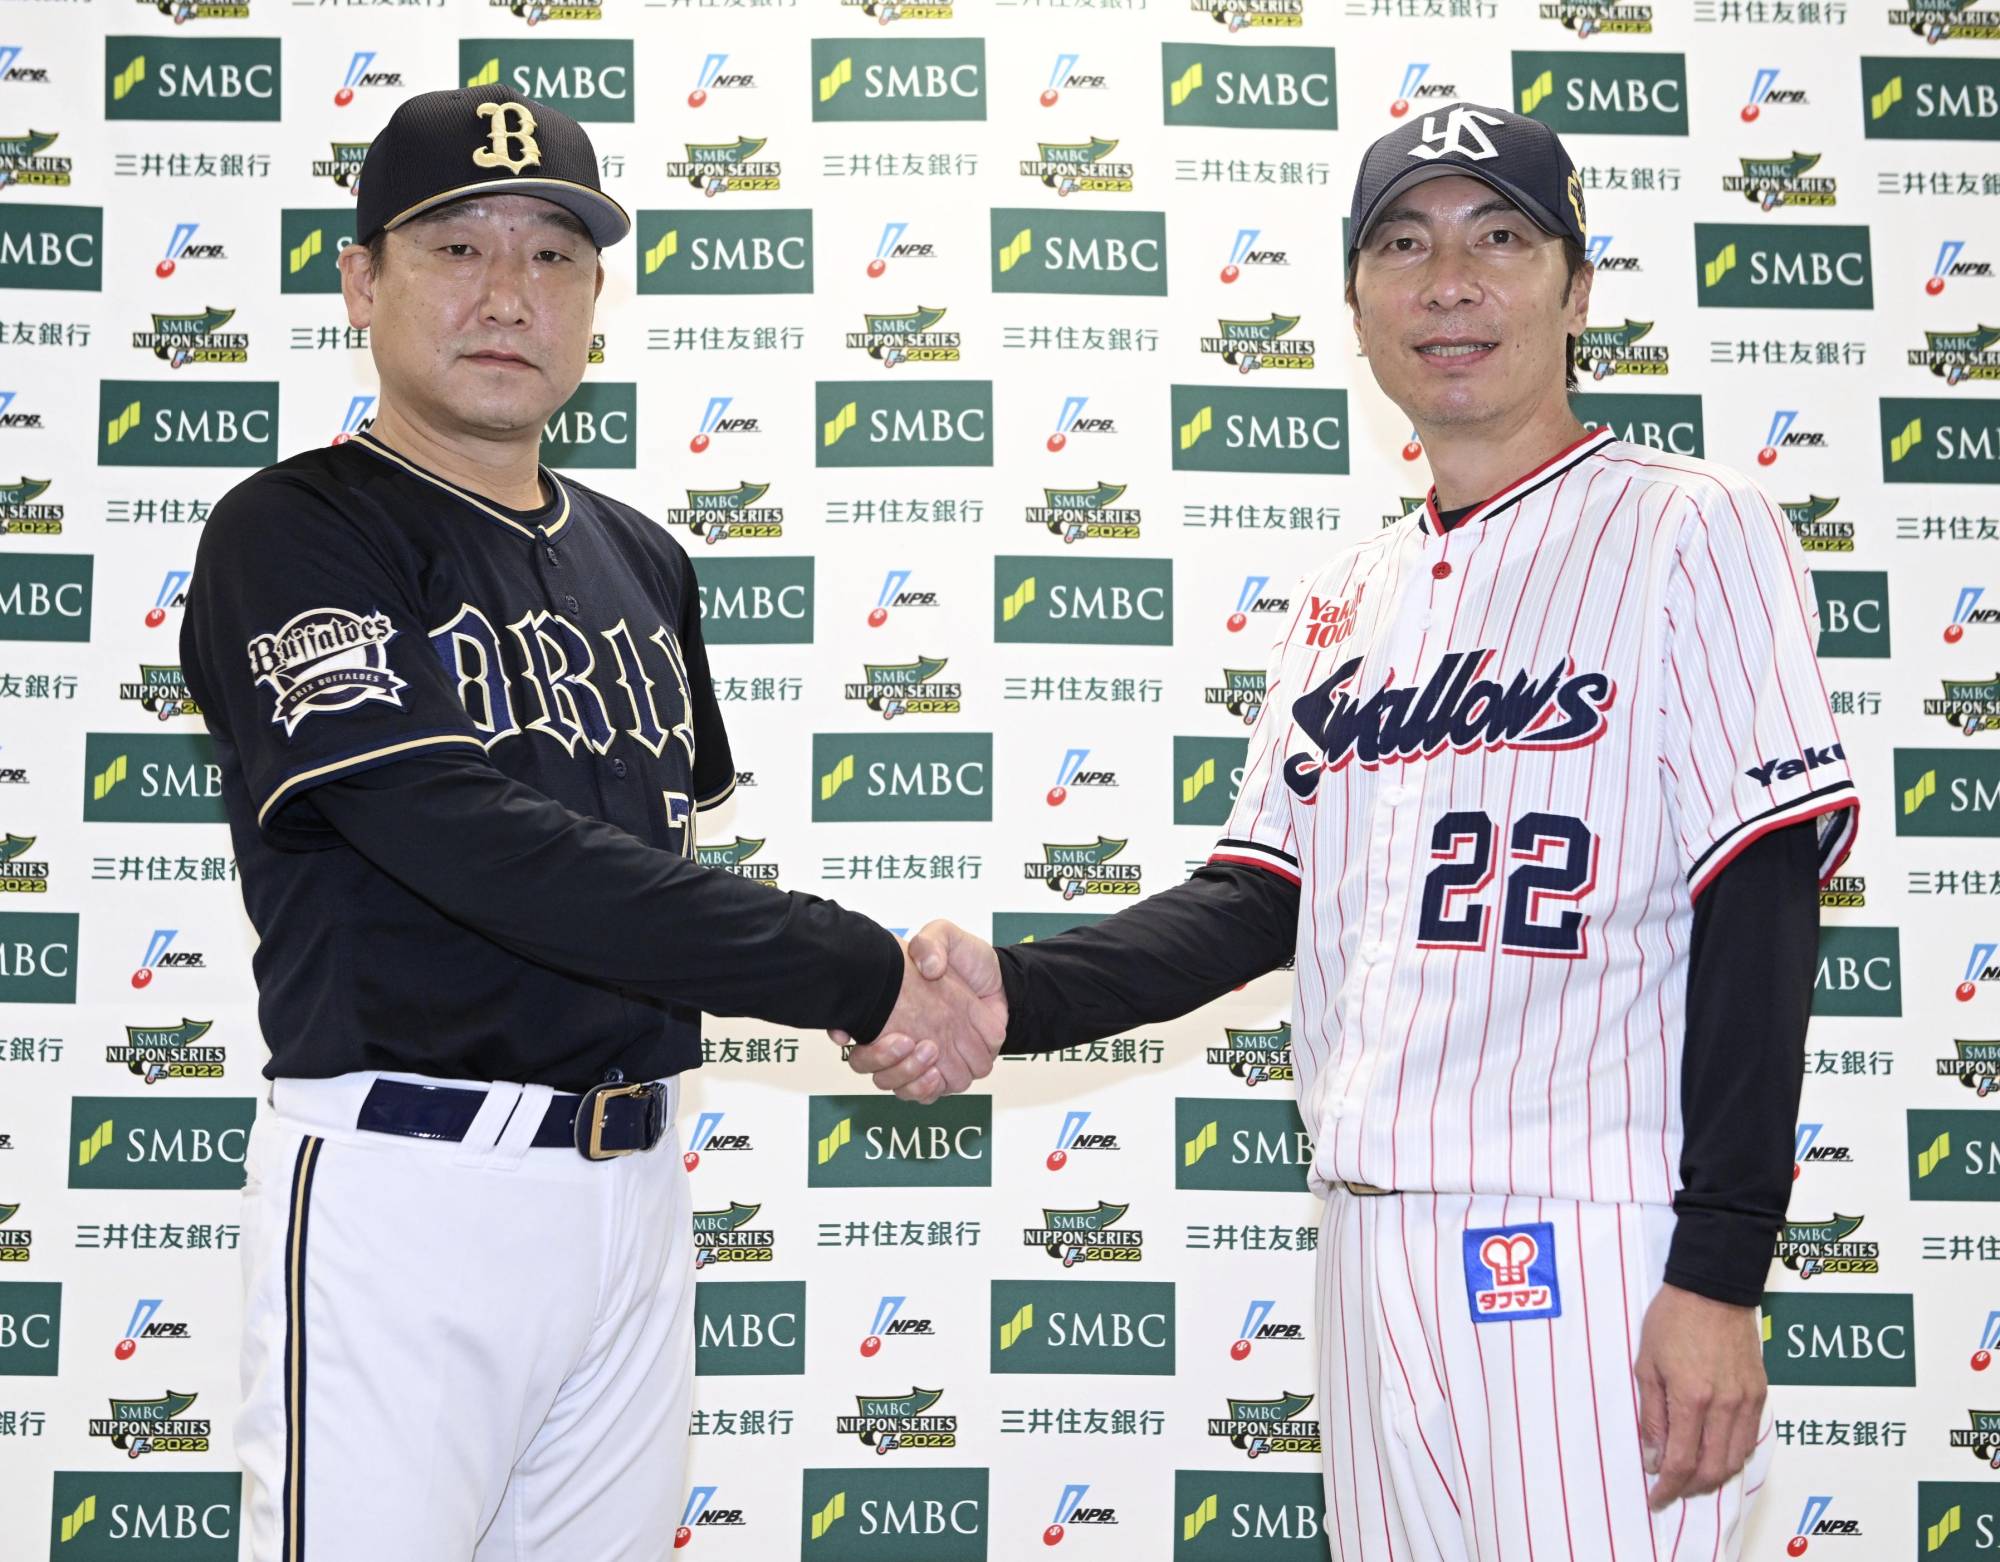 Swallows and Buffaloes assemble for Japan Series rematch